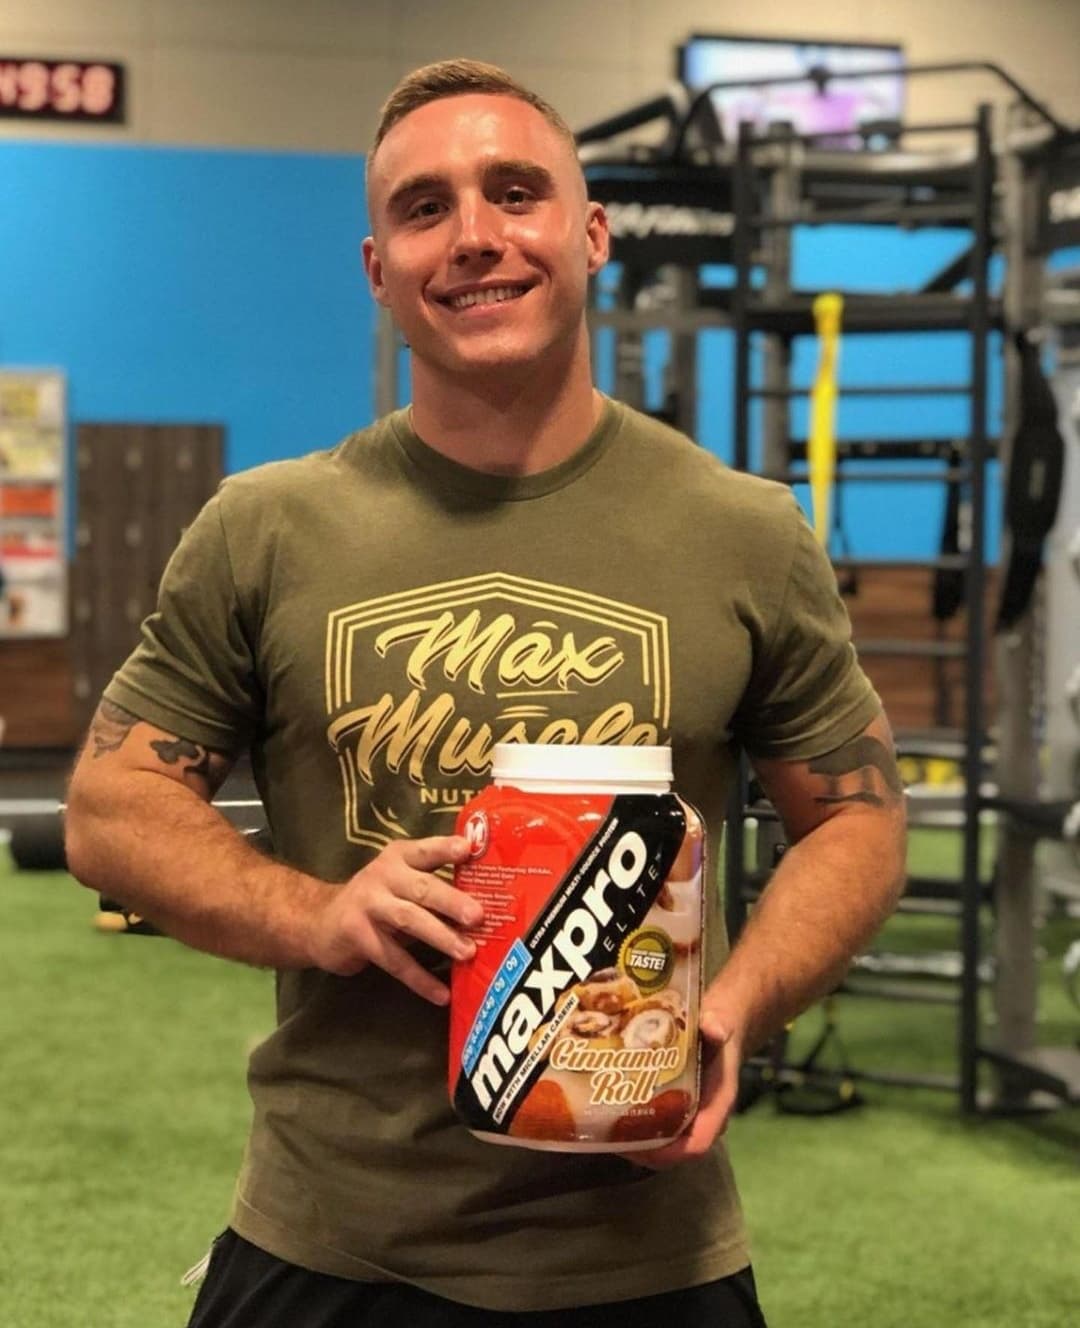 Child actor Lorenzo Brino posing for the camera inside a gym while holding a jar of MaxPro Elite protein | Photo: Instagram.com/mimi_brino